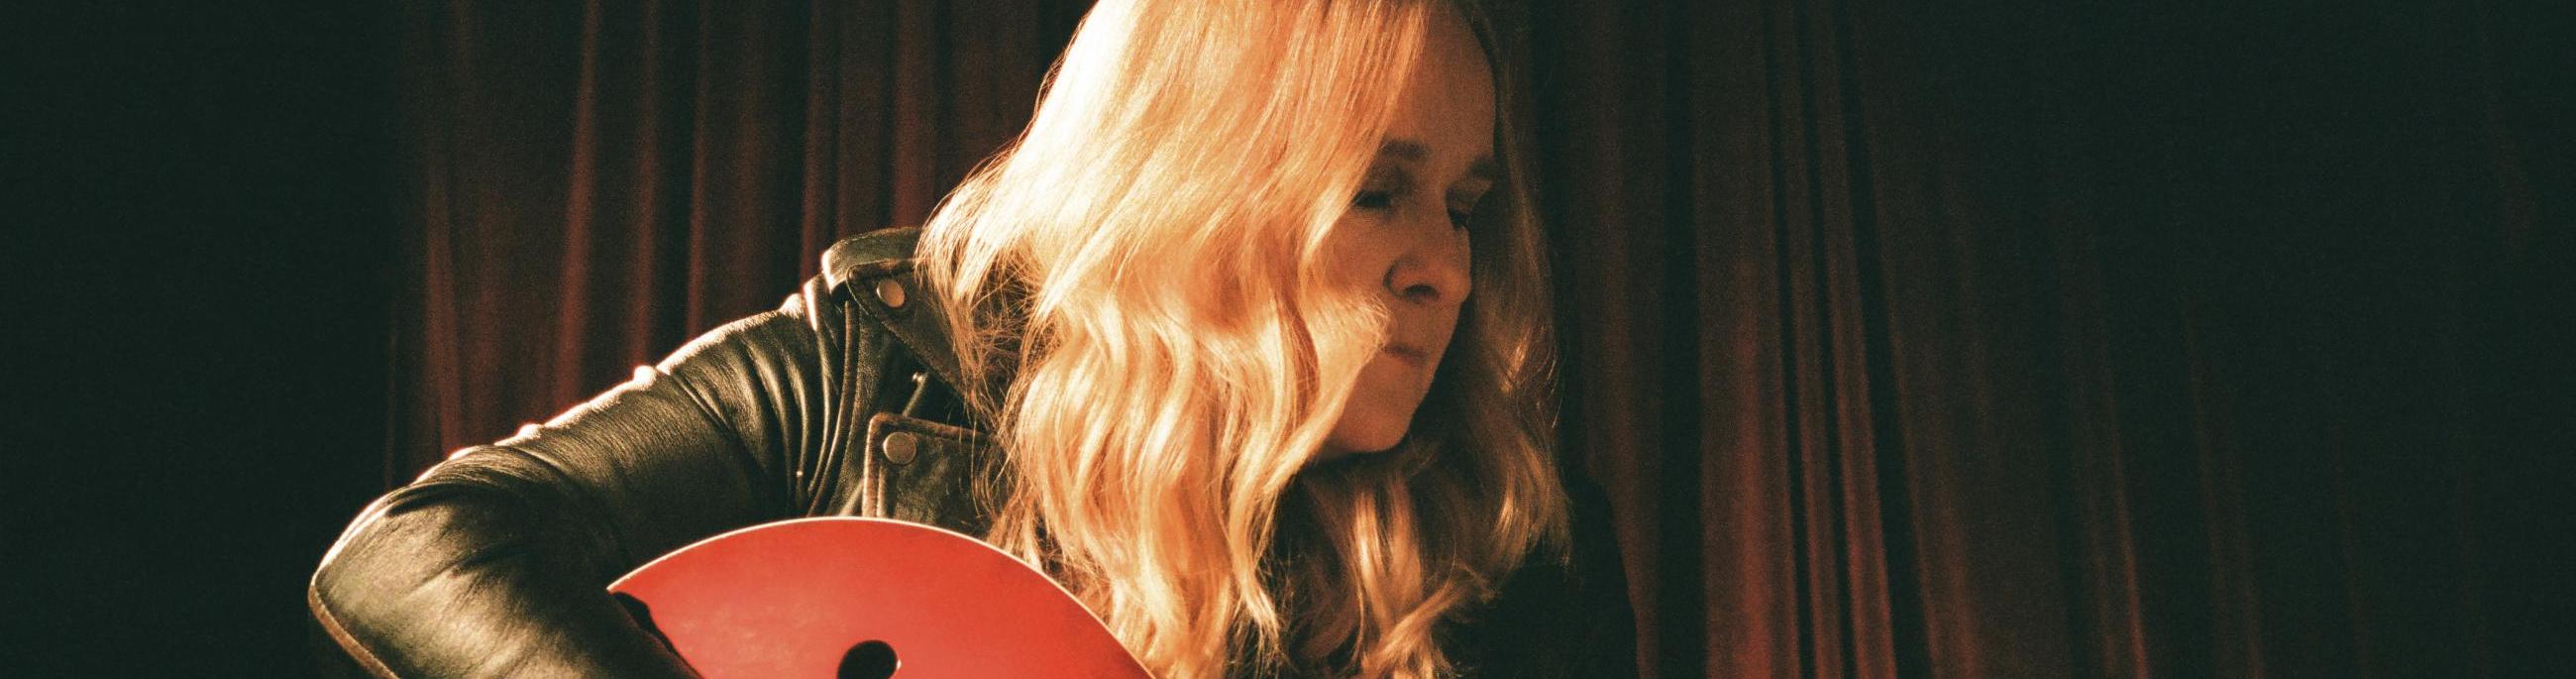 Blonde woman holding a red guitar looking to the right with a dark background